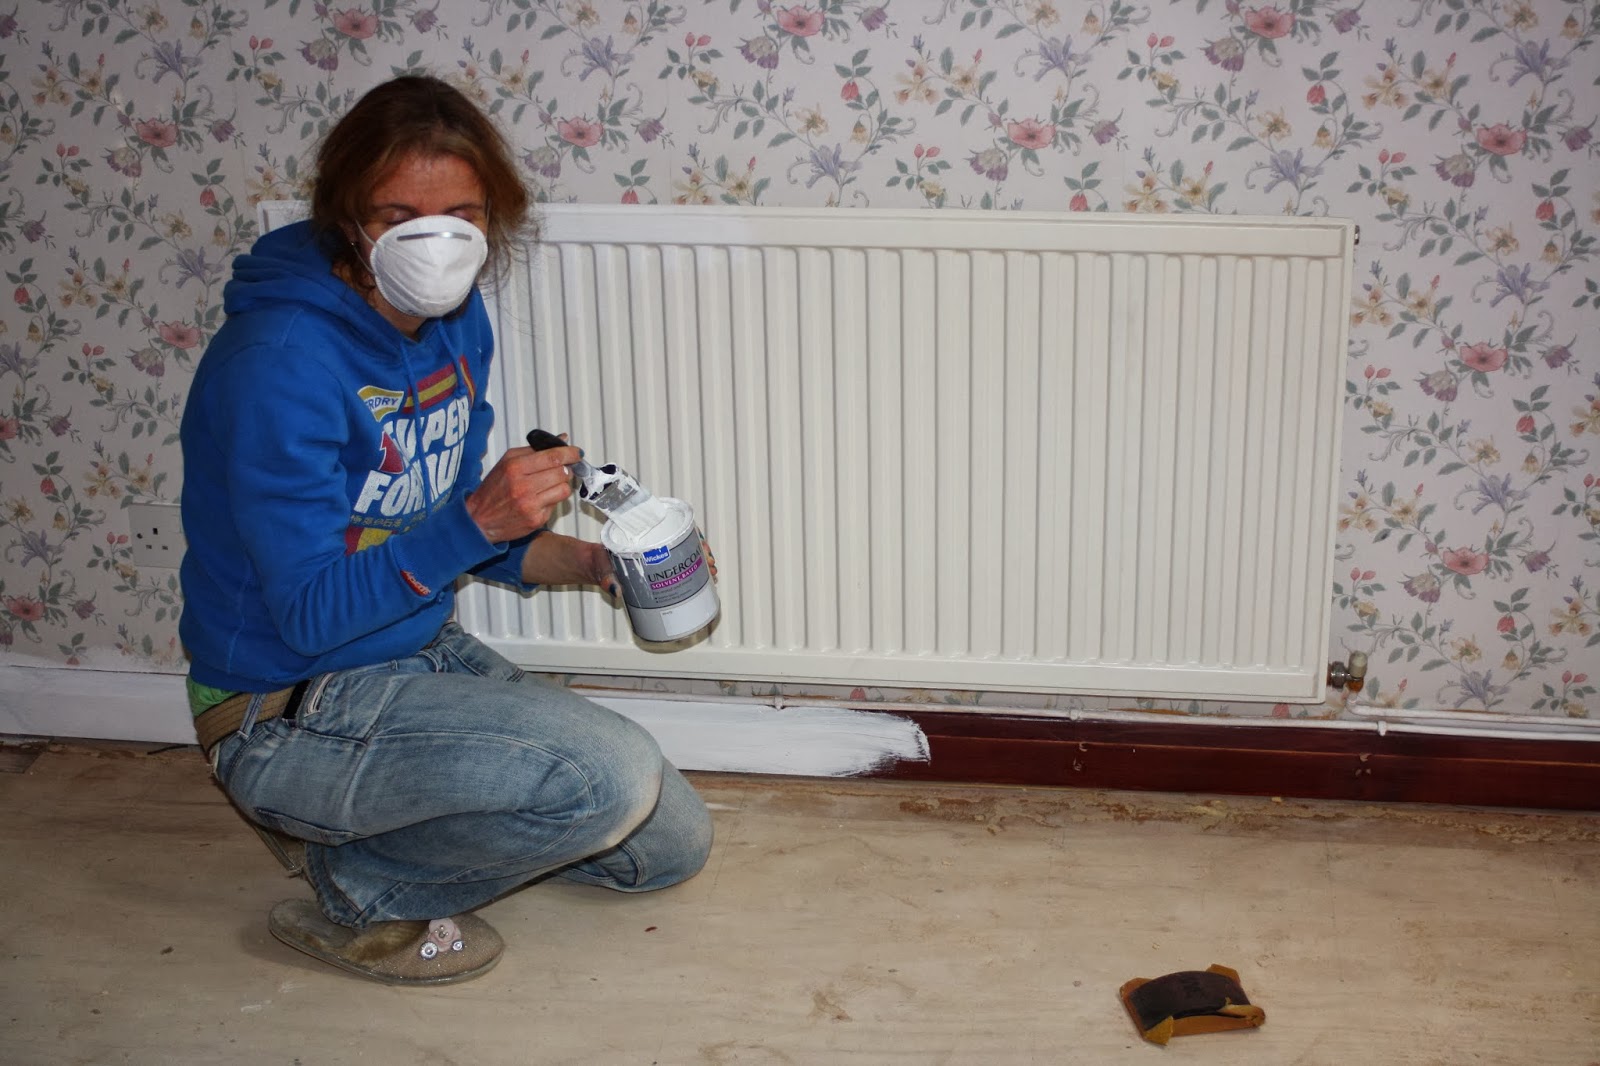 Moving-house-selfie-painting-skirting-boards